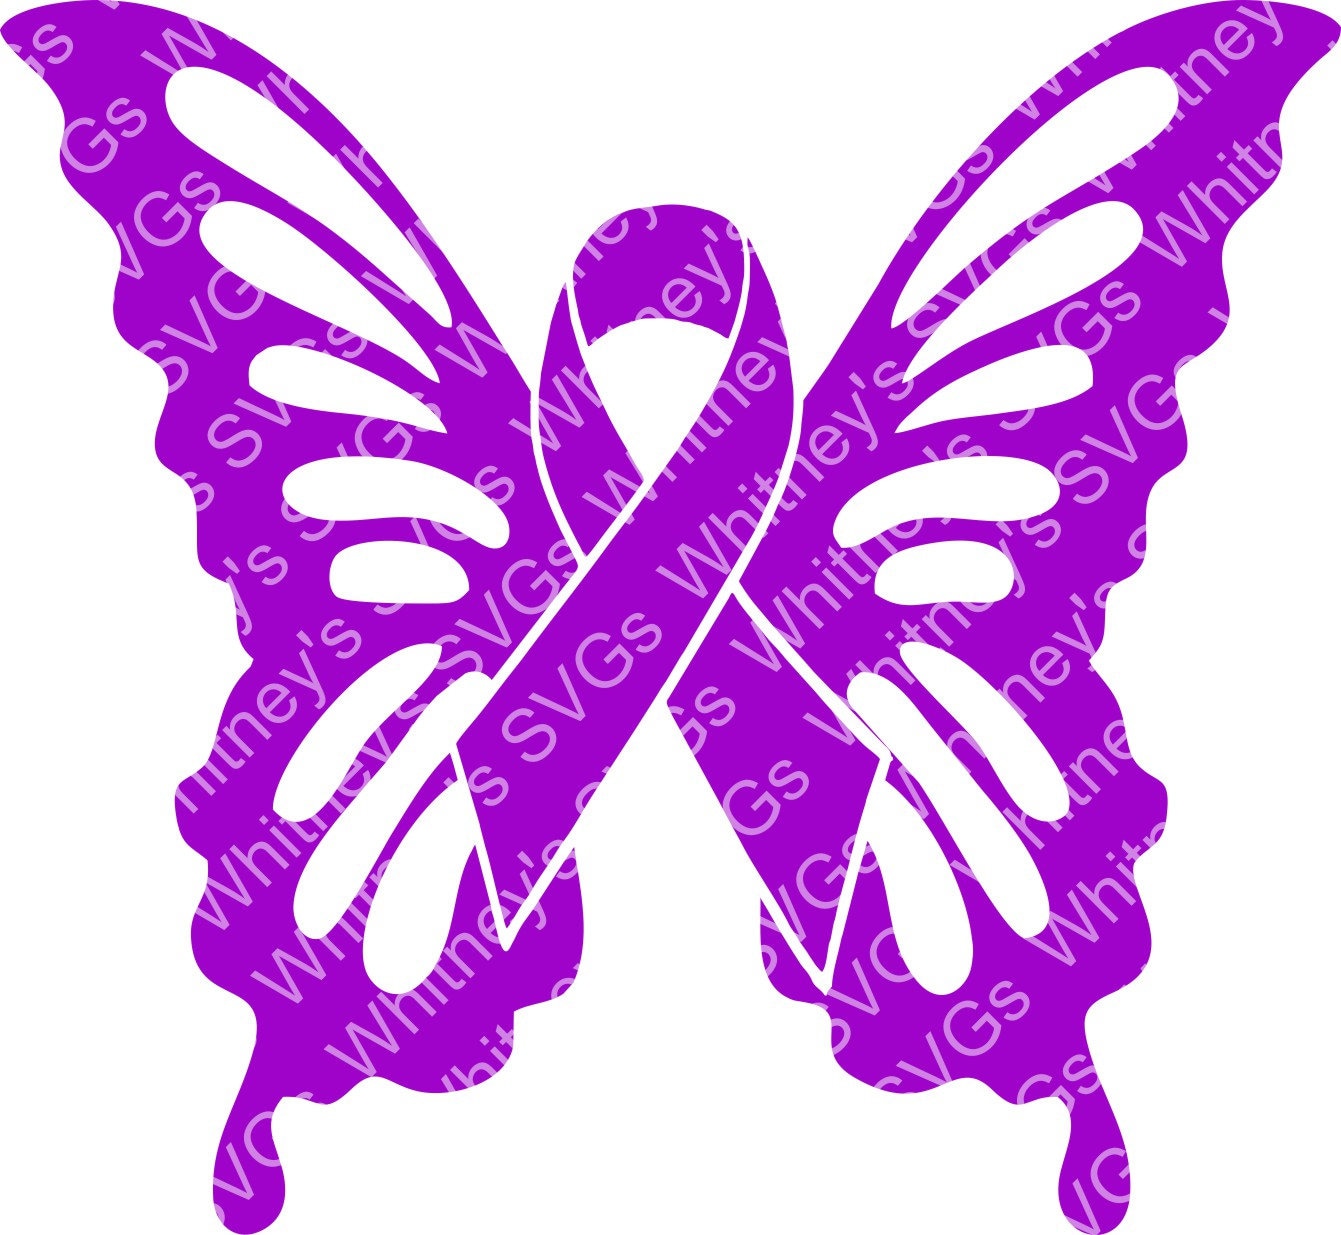 Download Lupus Awareness Butterfly SVG DXF Cutting File